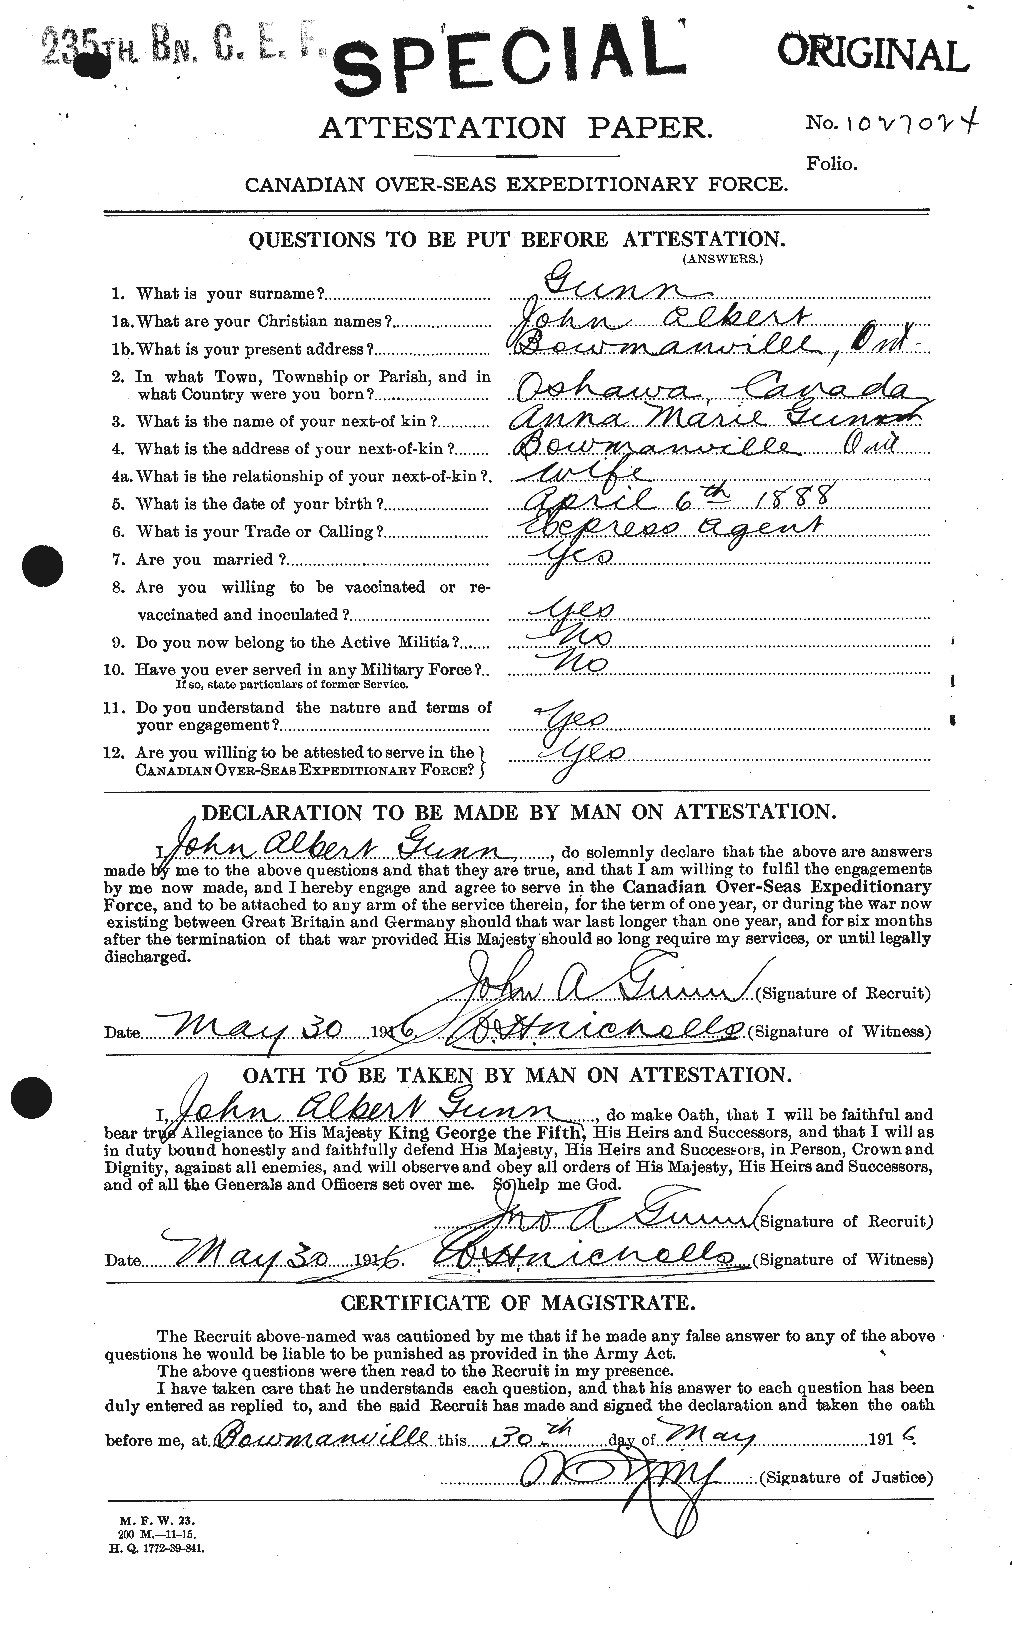 Personnel Records of the First World War - CEF 369291a